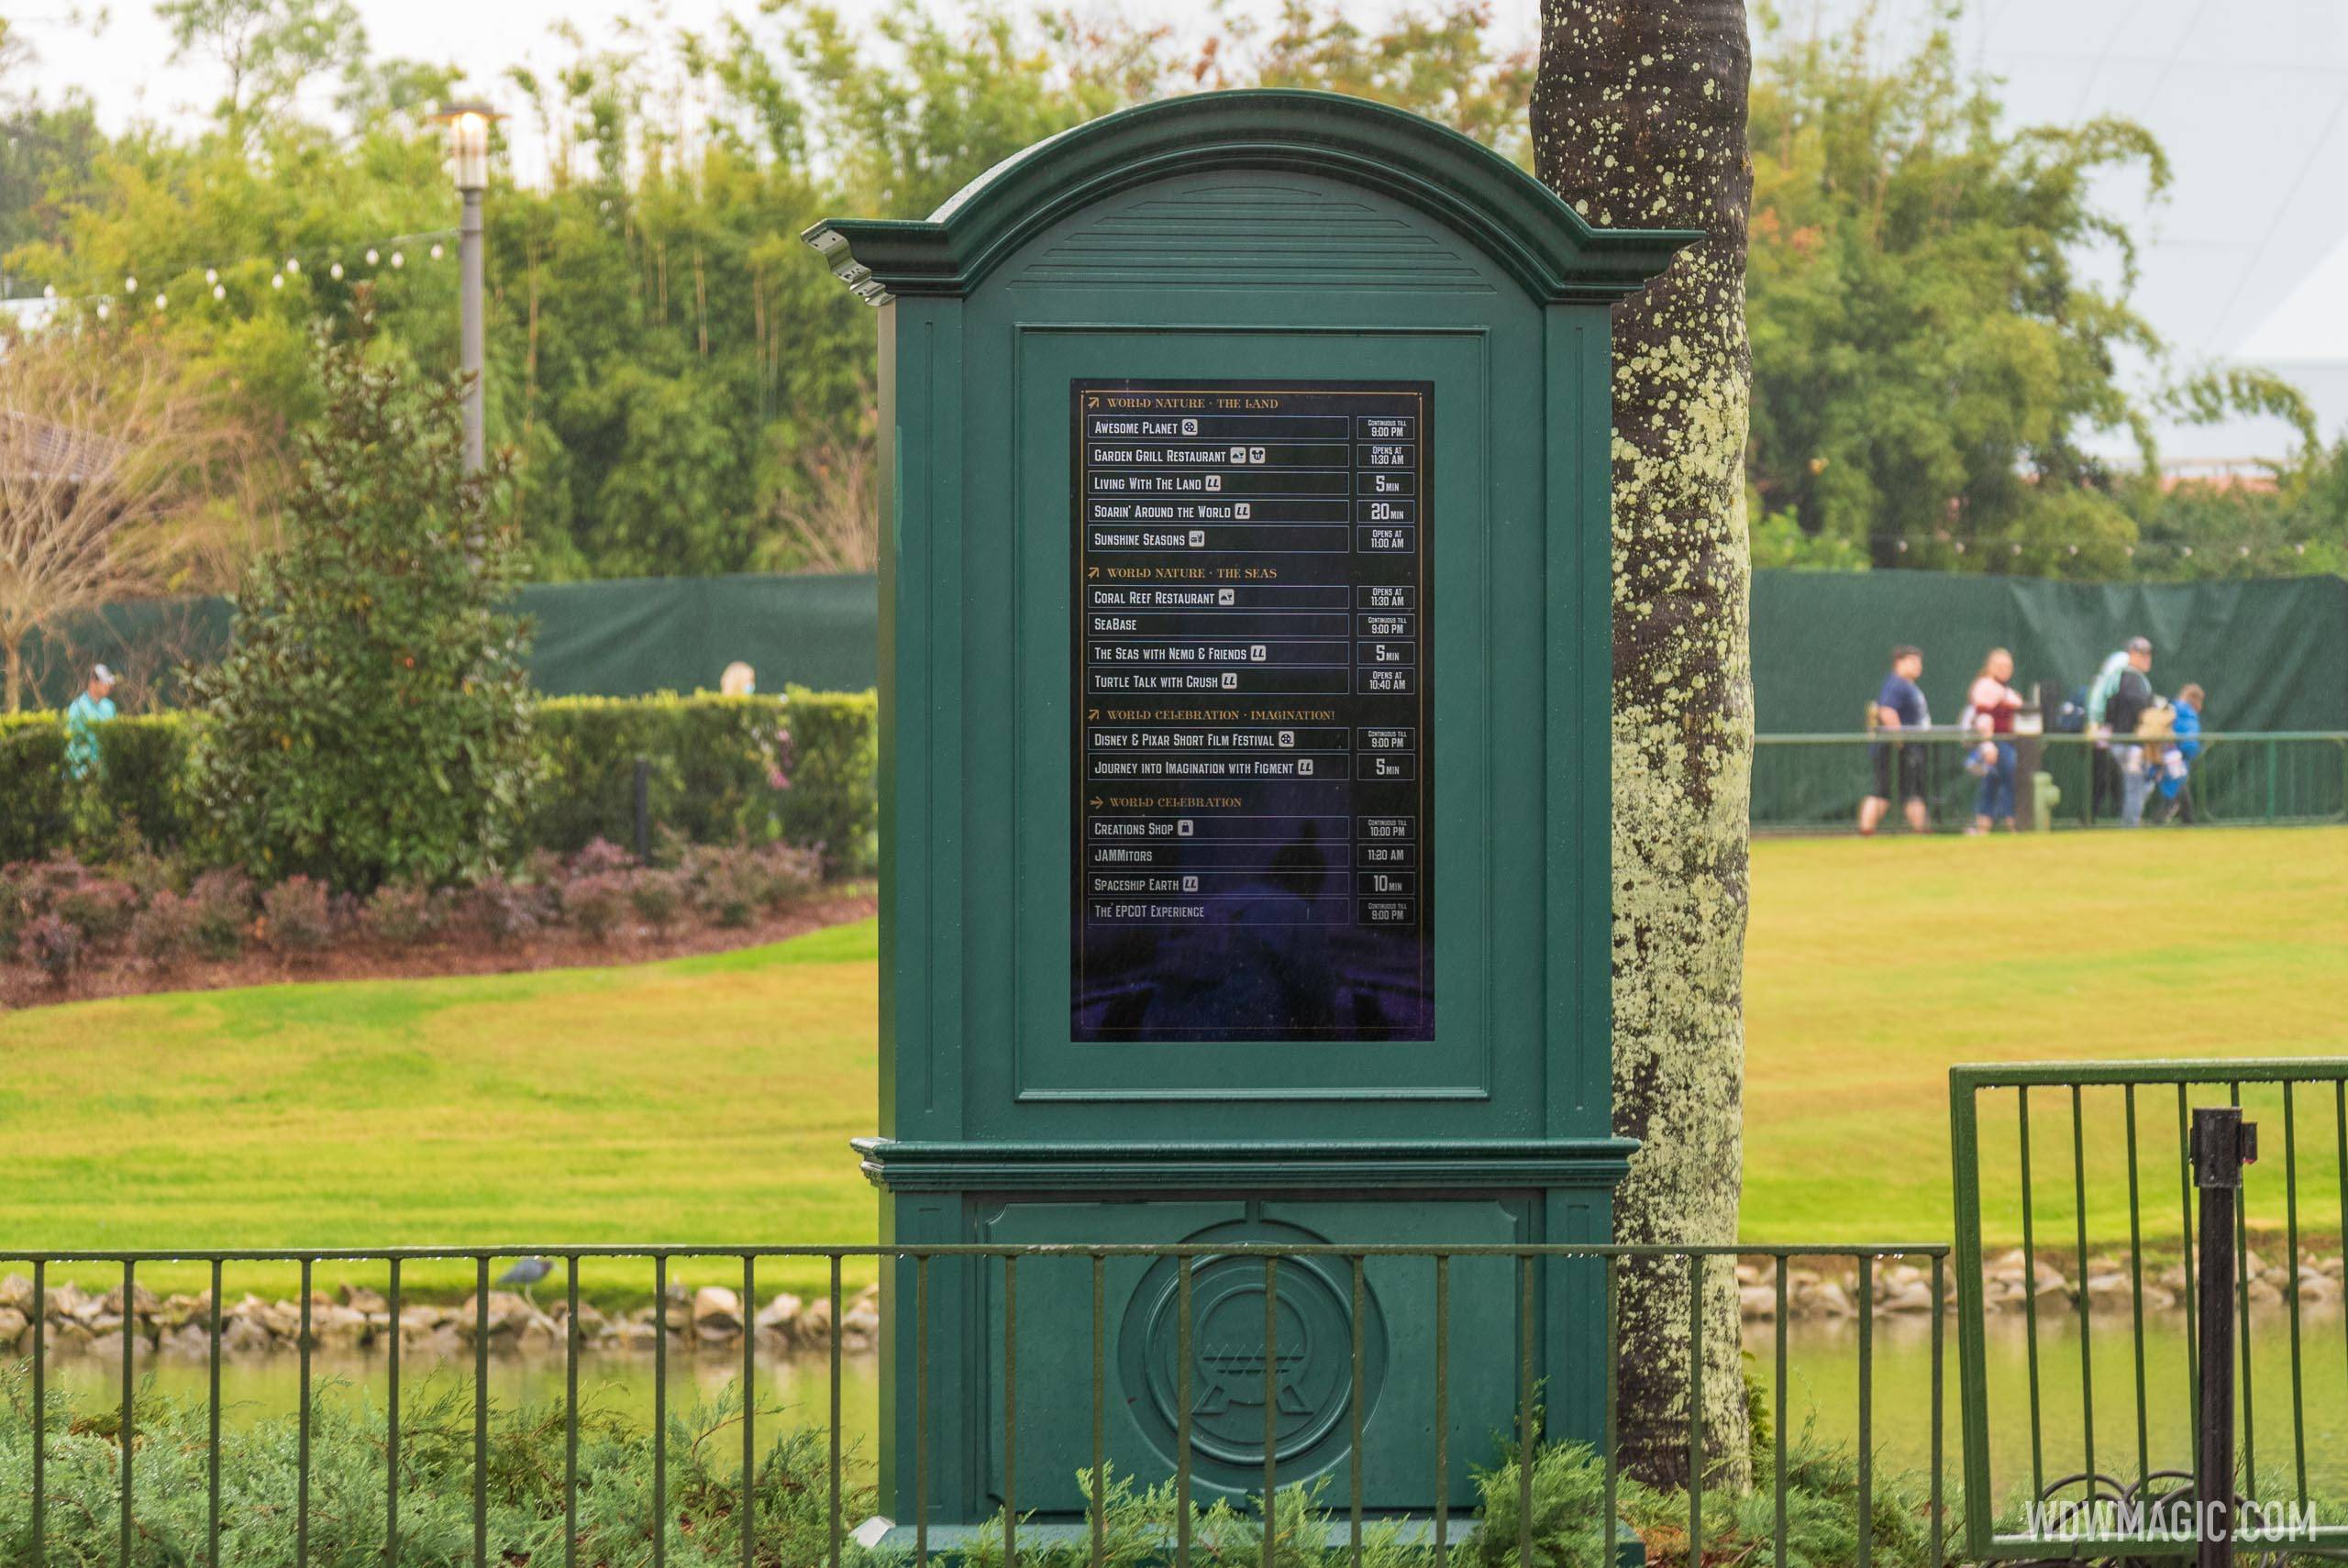 Themed Digital Tip Boards around EPCOT